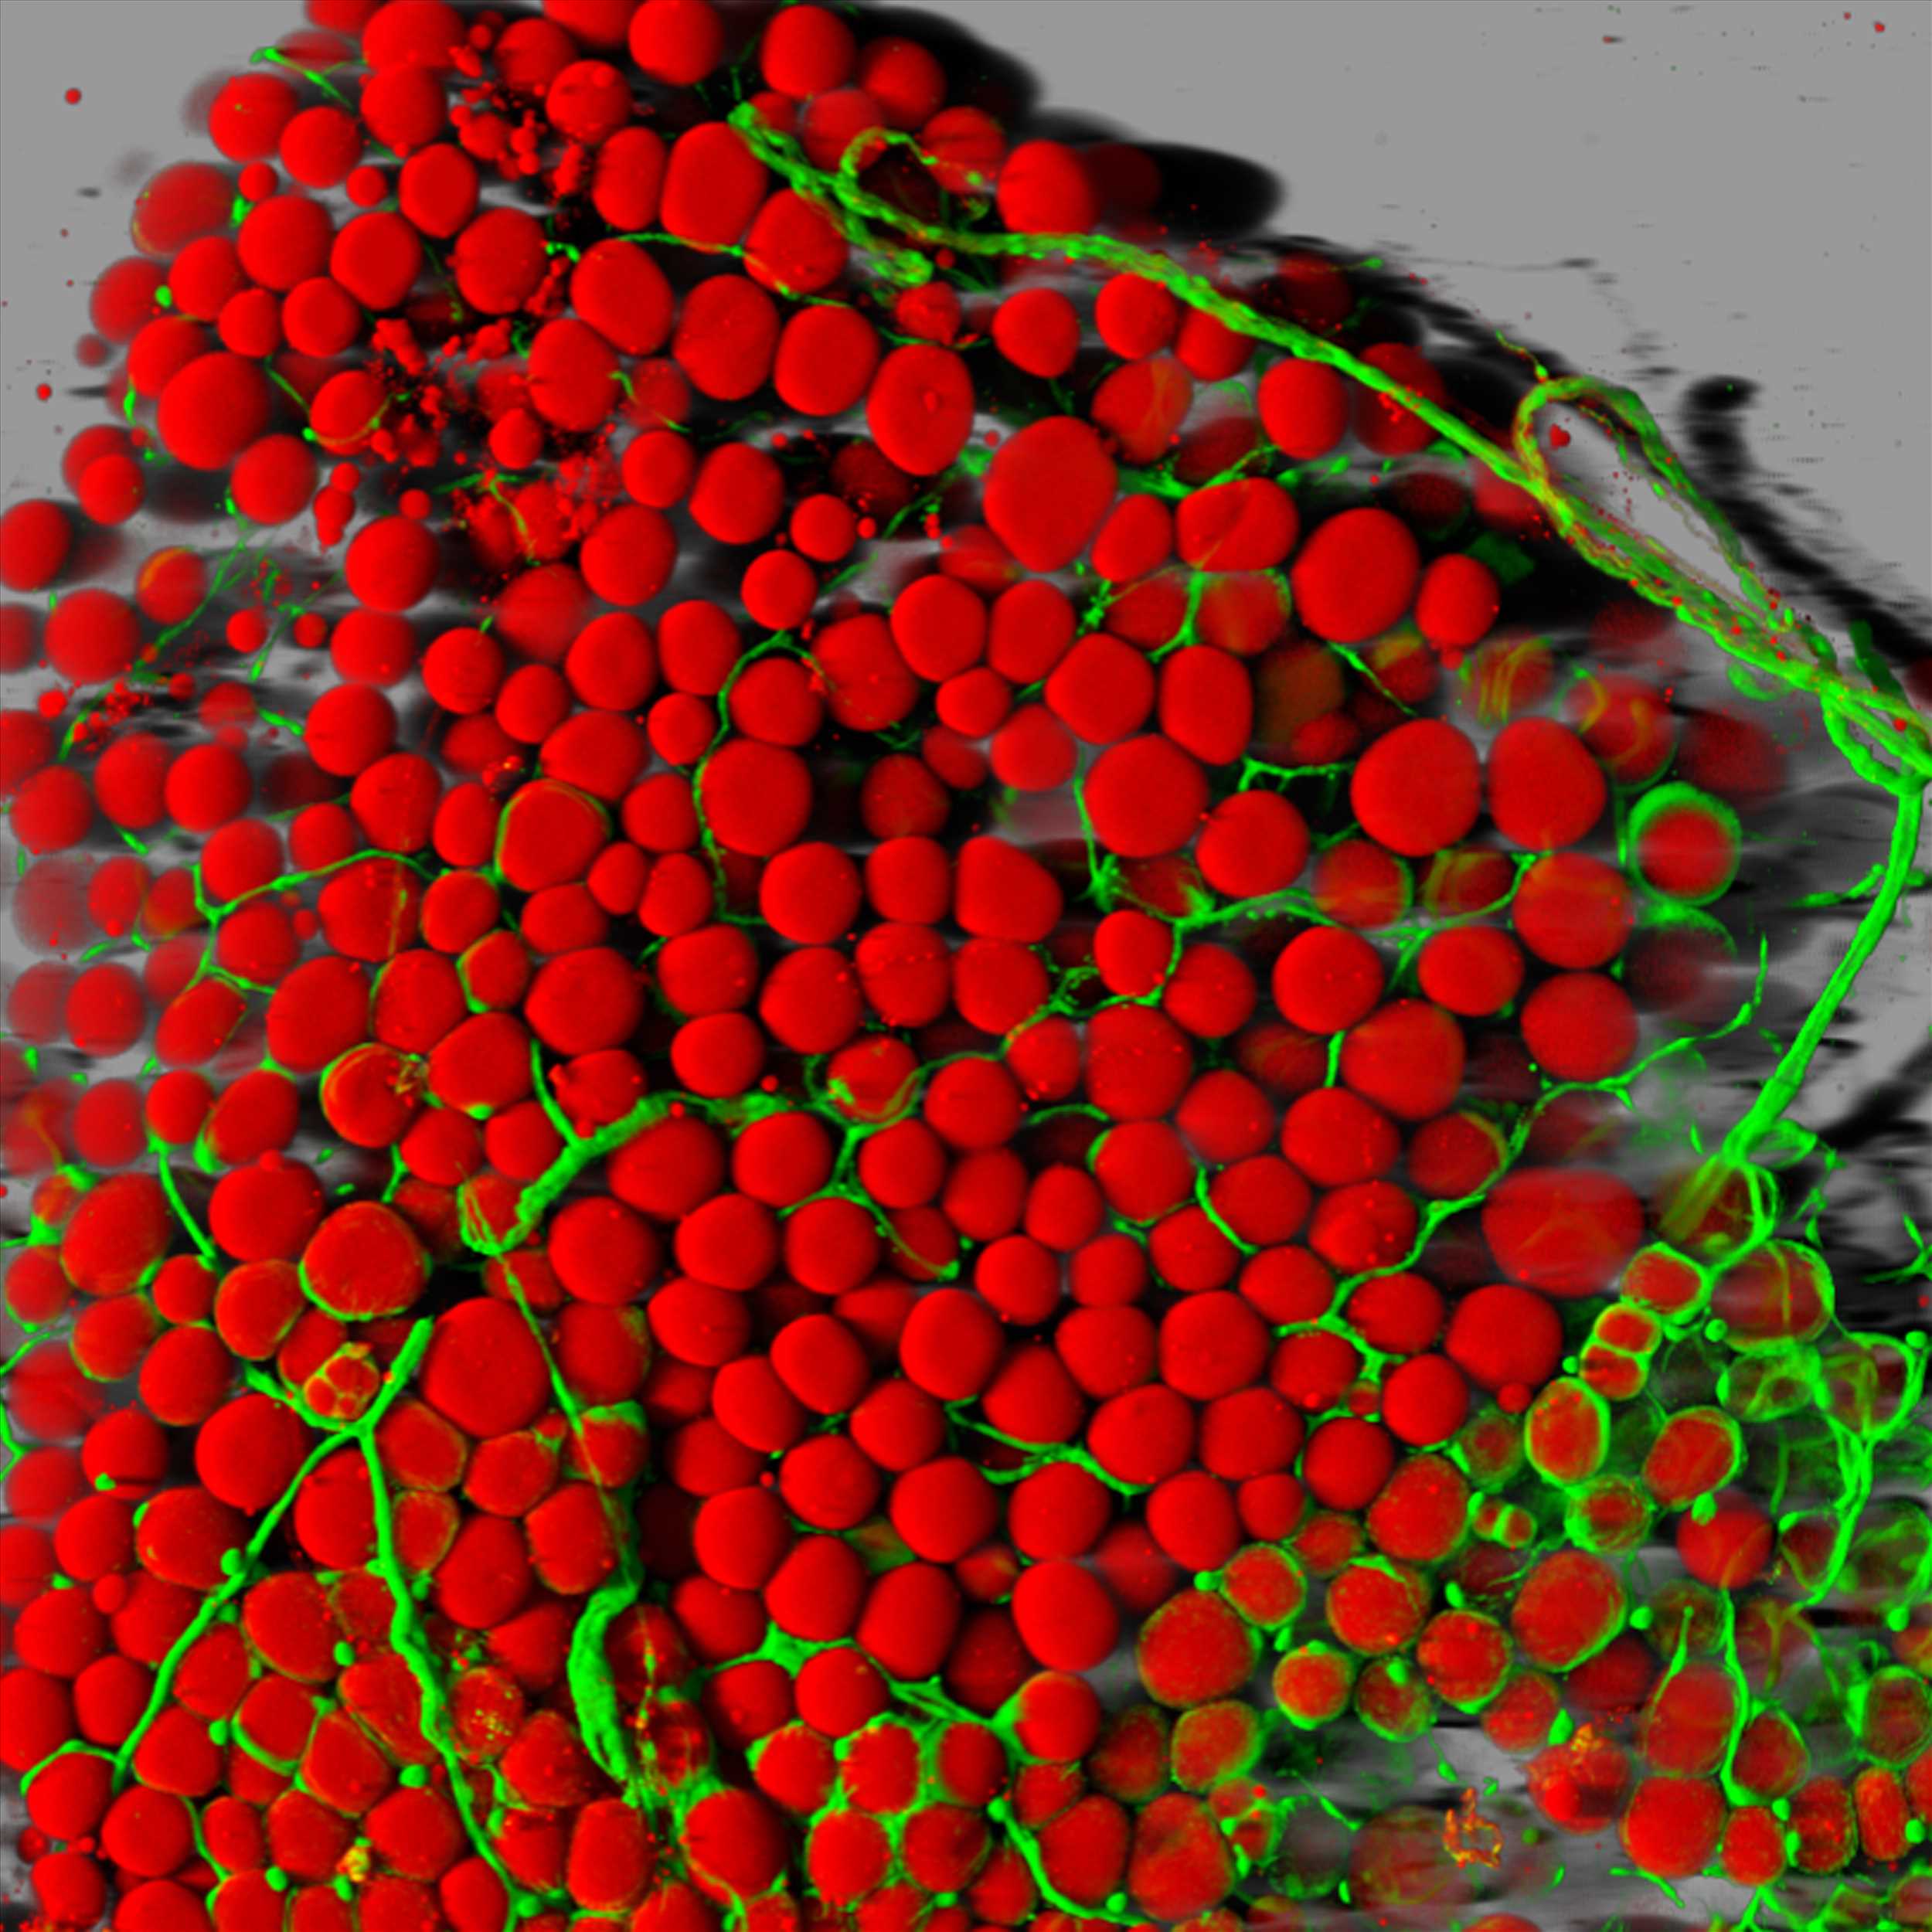 Fat cells (red) and blood vessels (green)